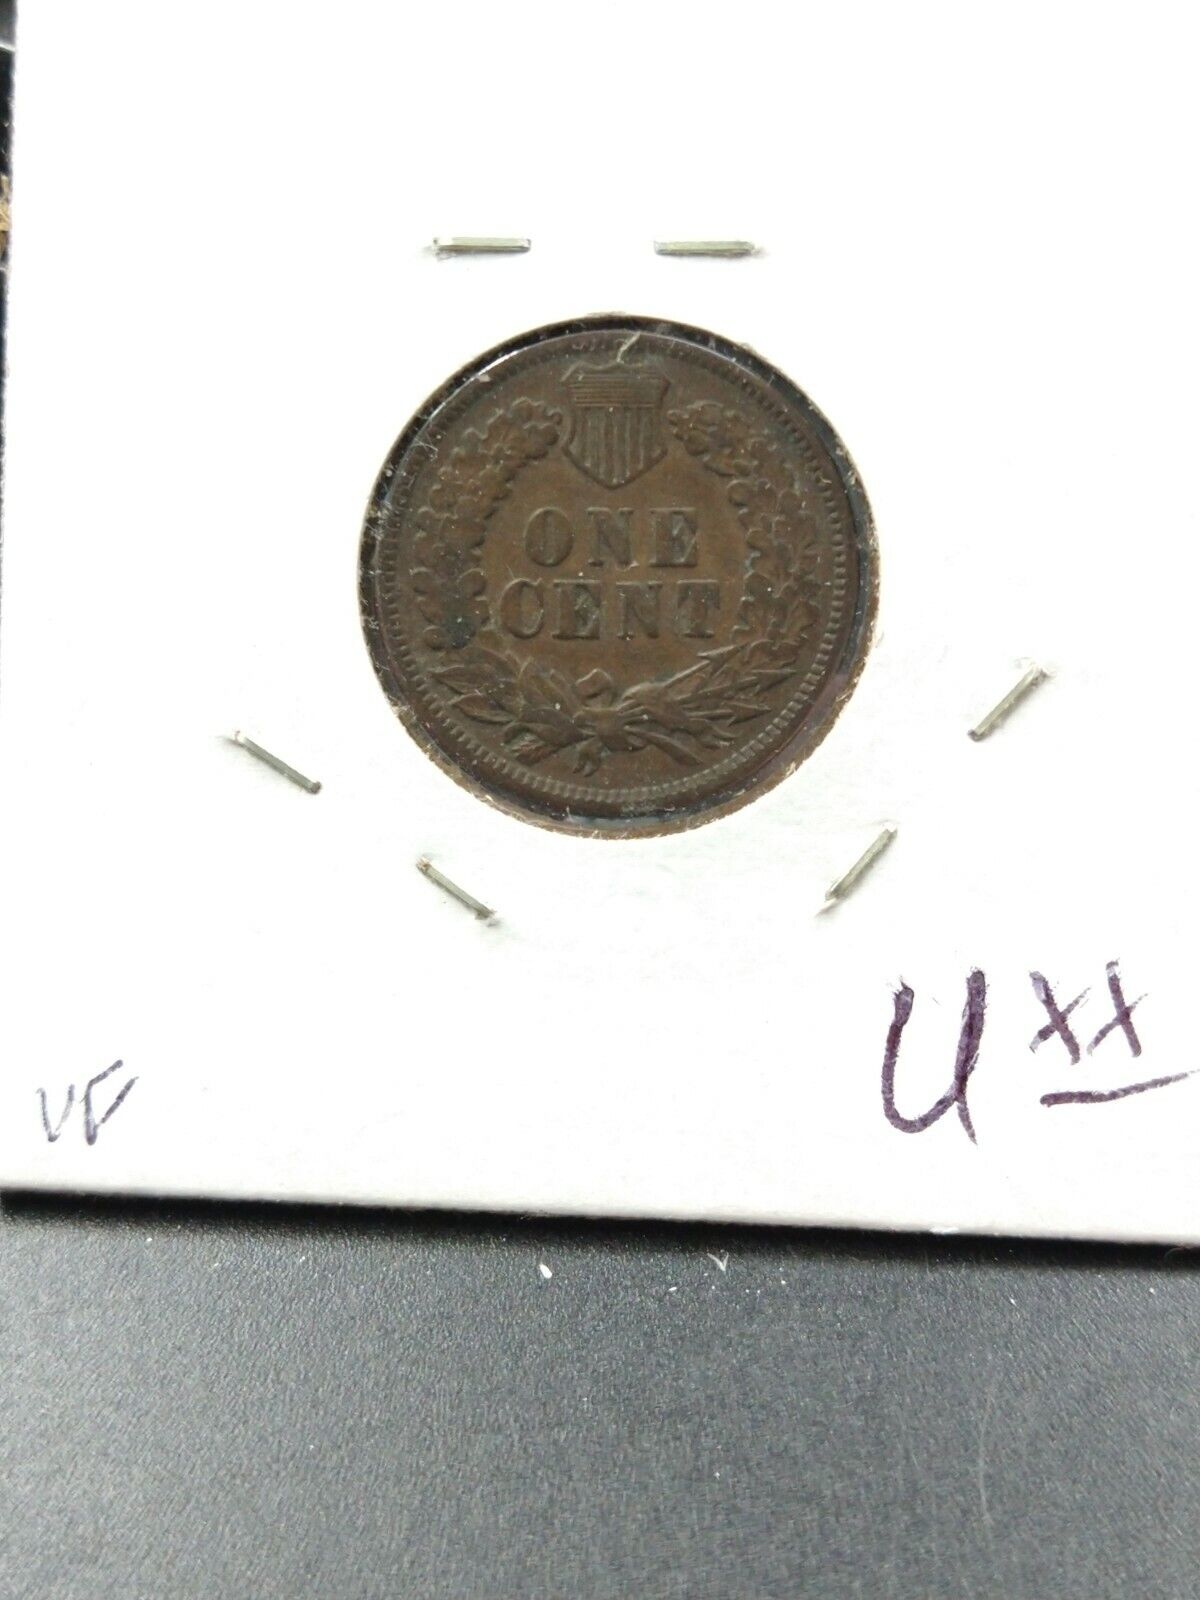 1890 Indian Head Cent Penny Coin Average Fine / Very Fine